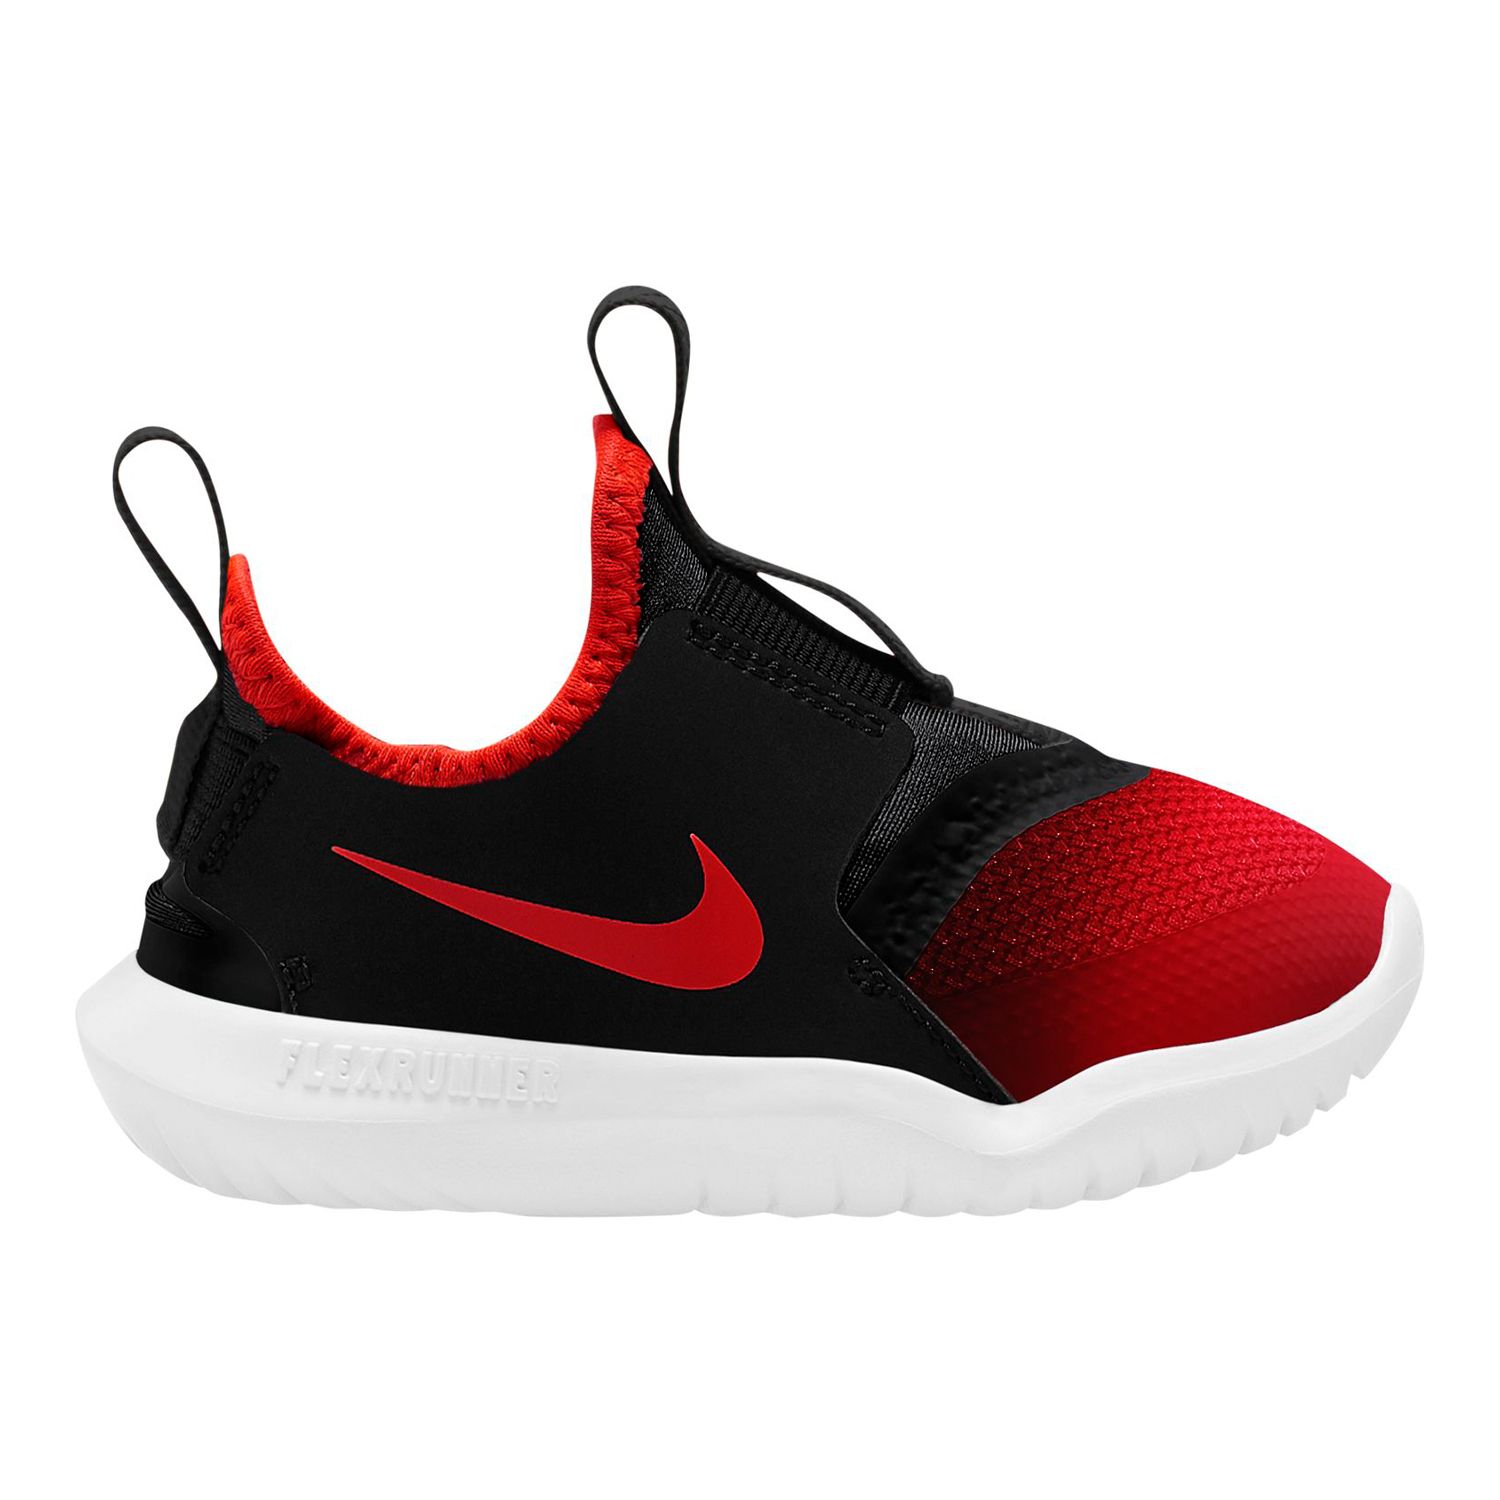 Clearance Red Nike Shoes | Kohl's